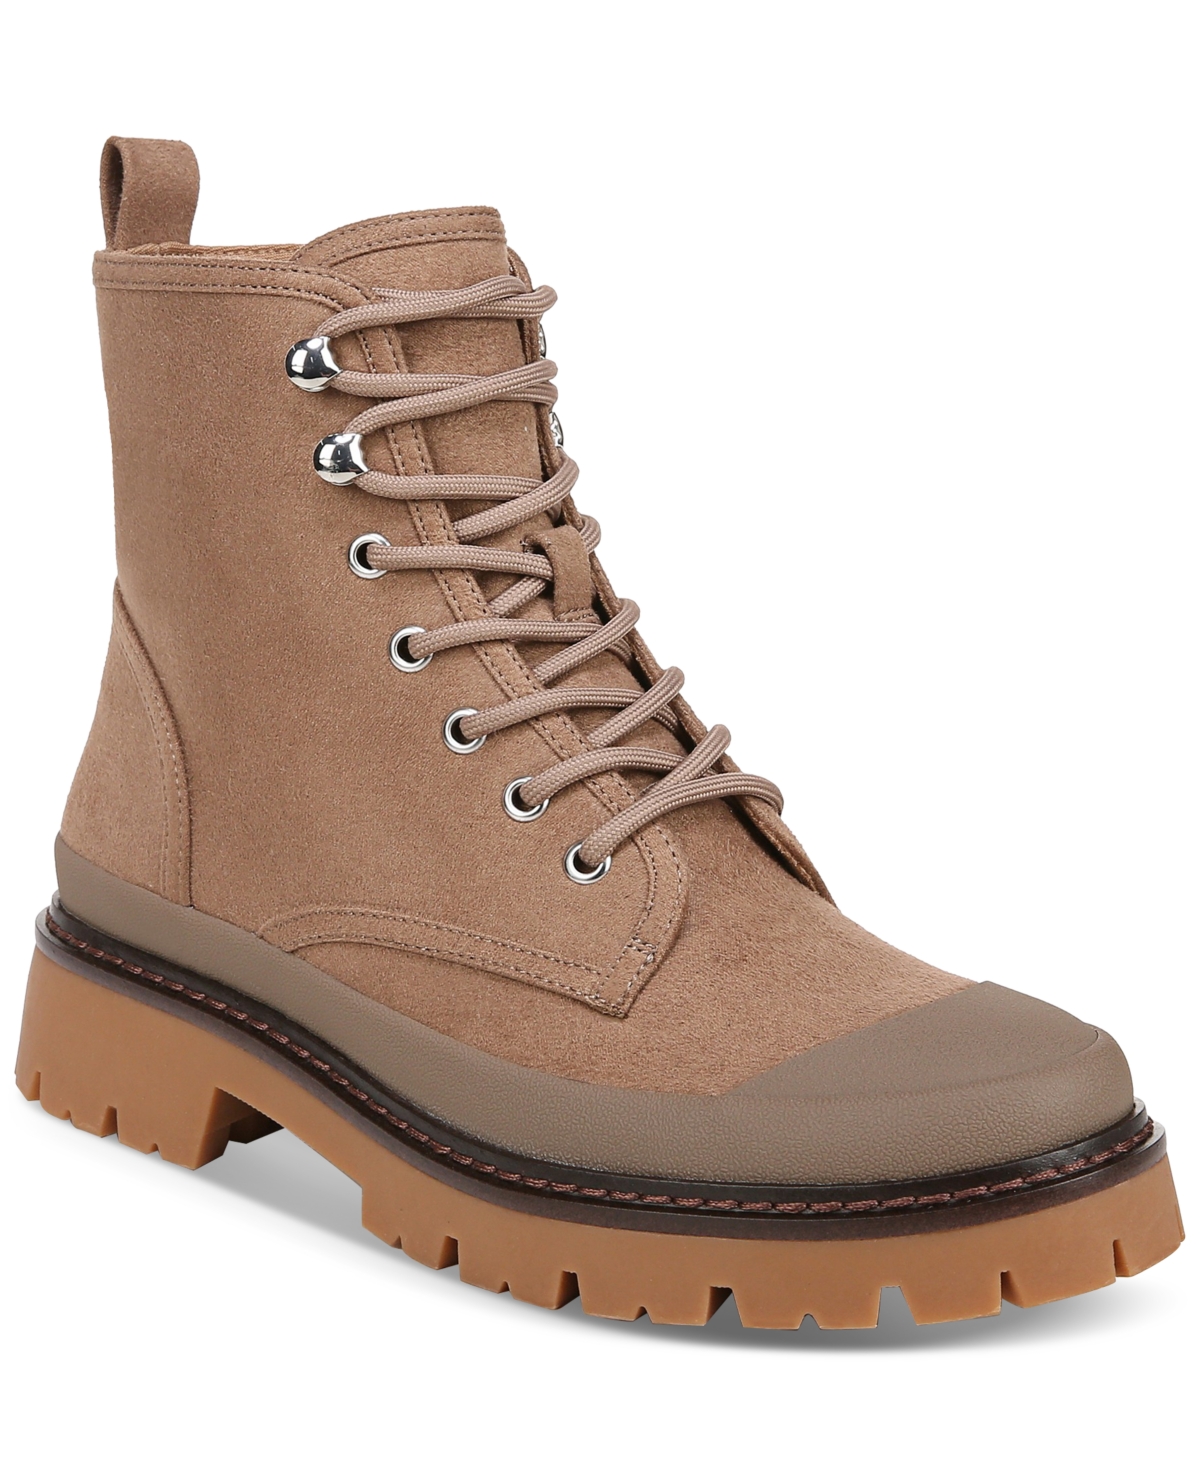 Women's Janessaa Memory Foam Lace Up Lug Sole Booties, Created for Macy's - Toffee Micro